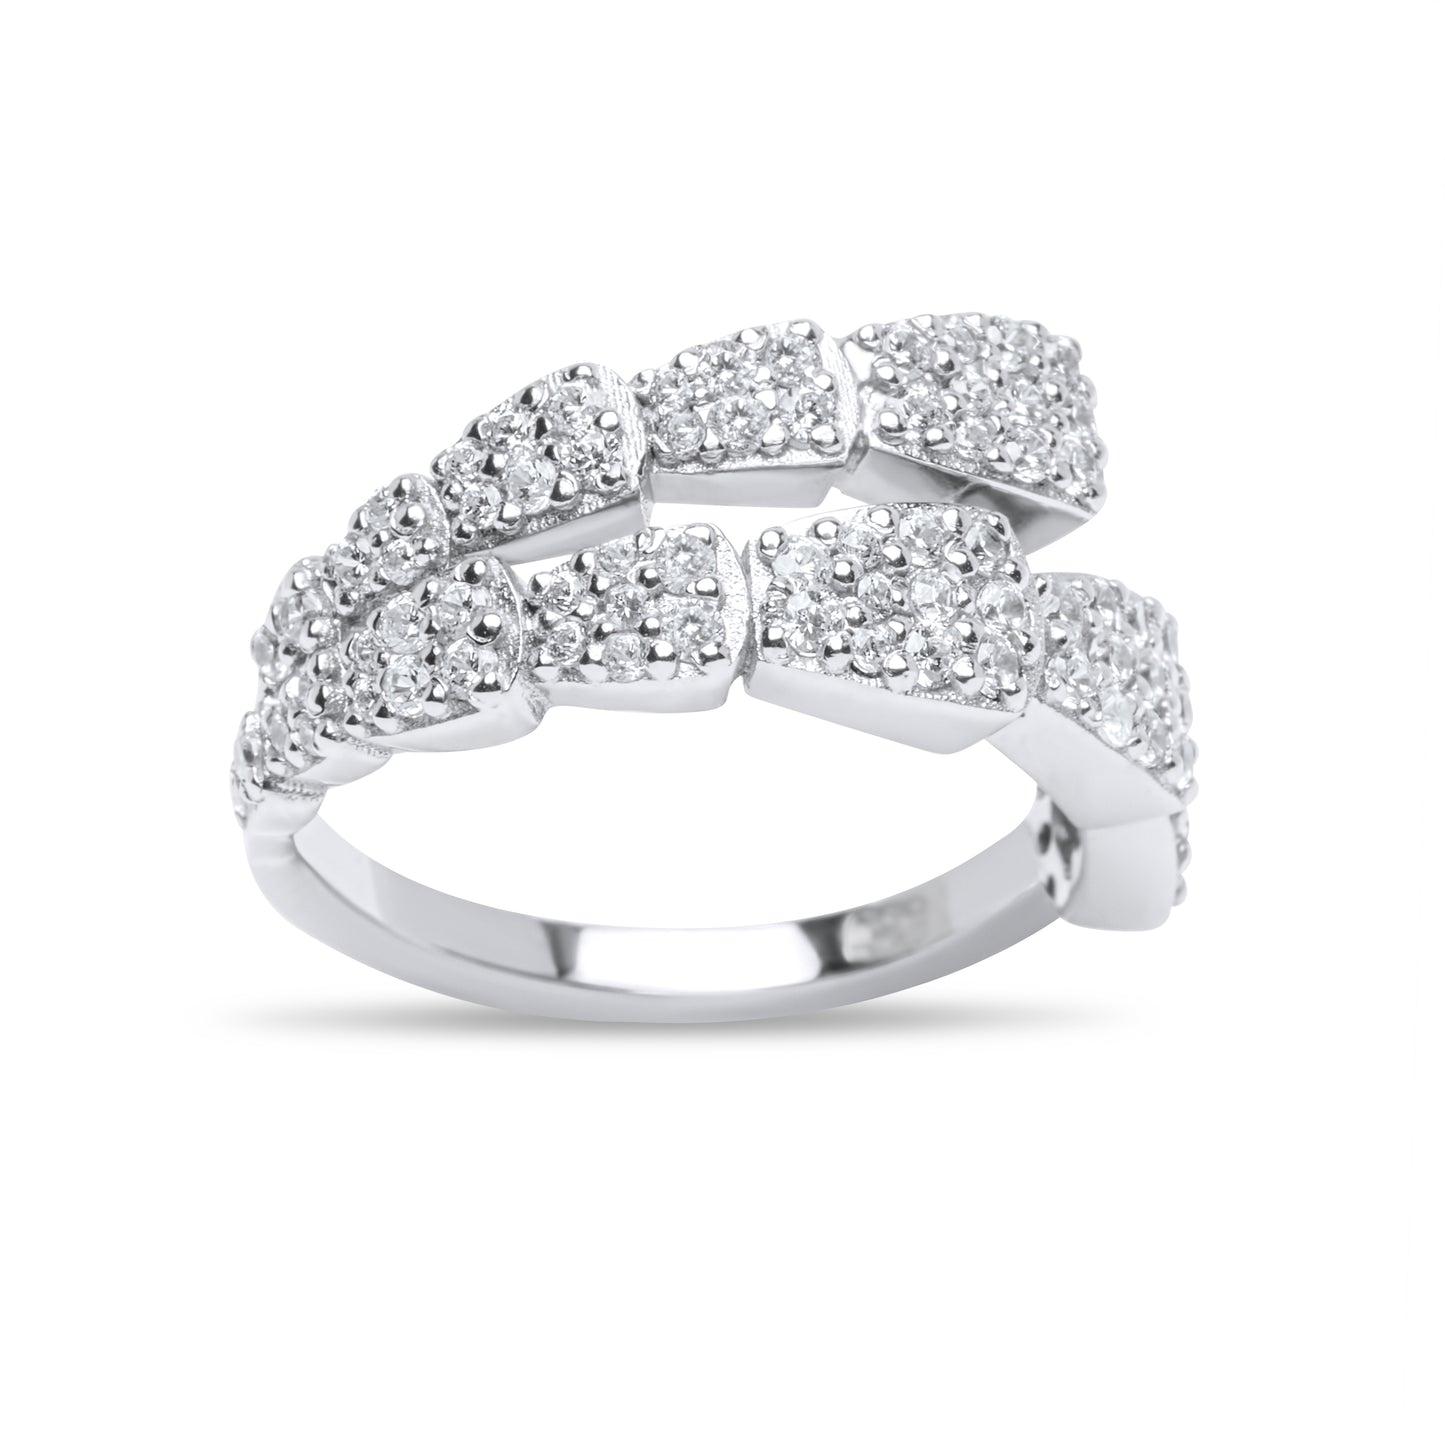 Sparkle Ring - Silver Rhodium Plated